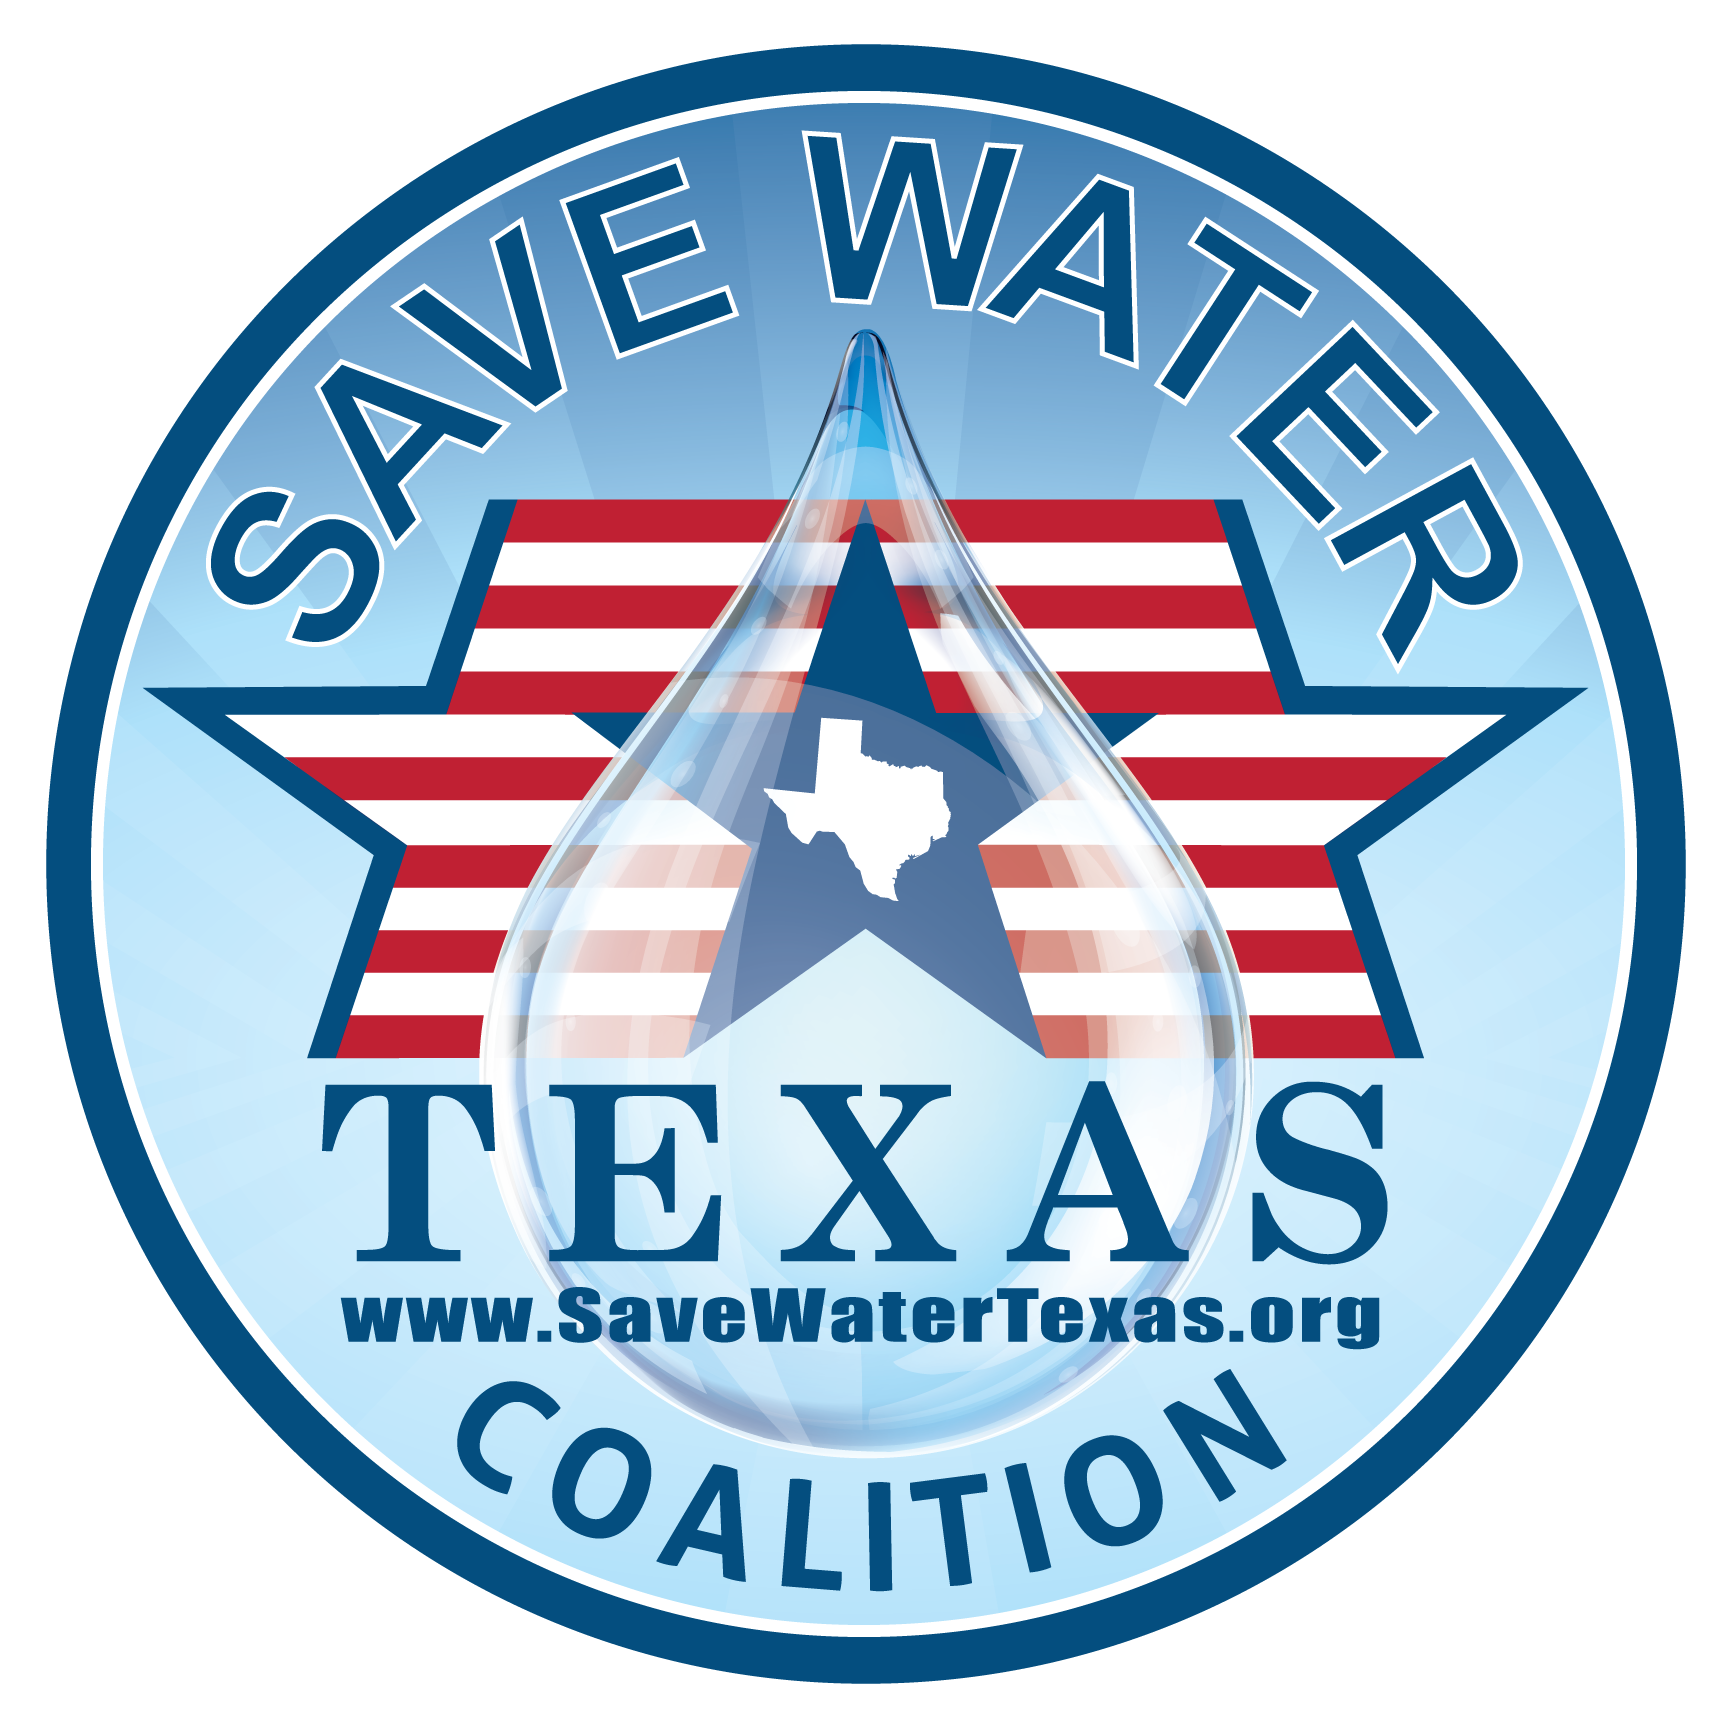 Save Water Texas Coalition